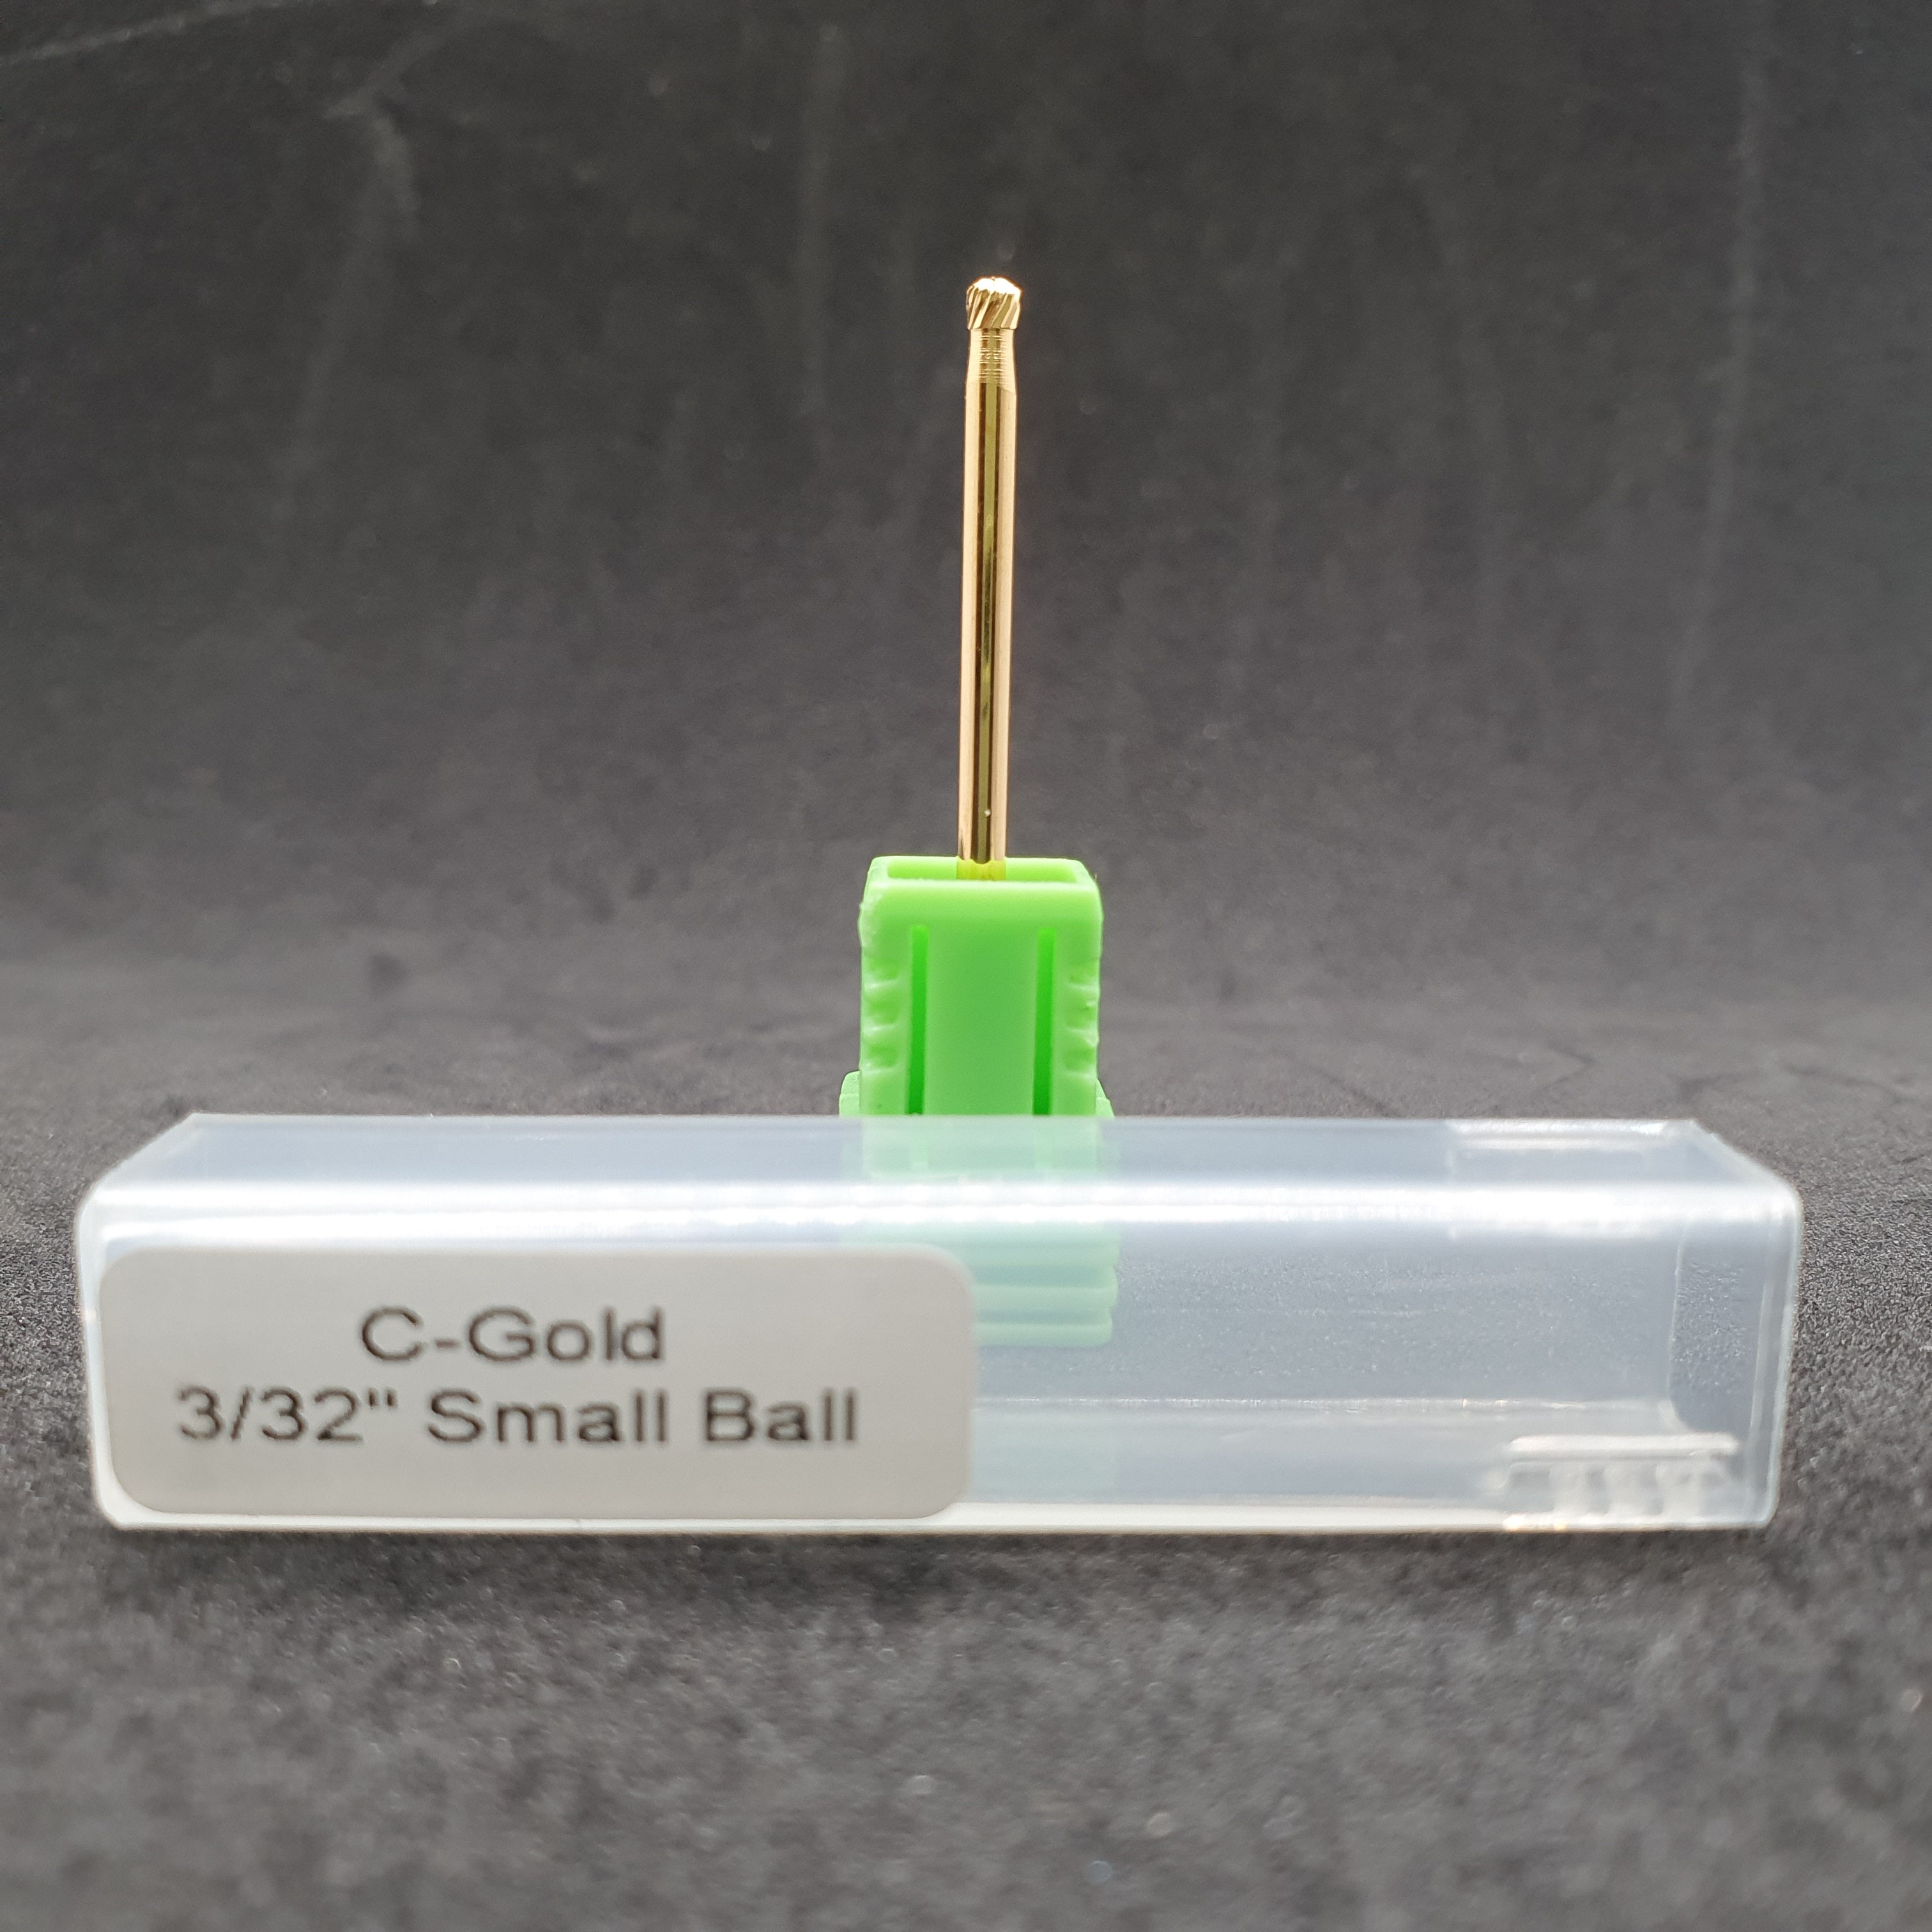 C-GOLD 3/32" SMALL BALL